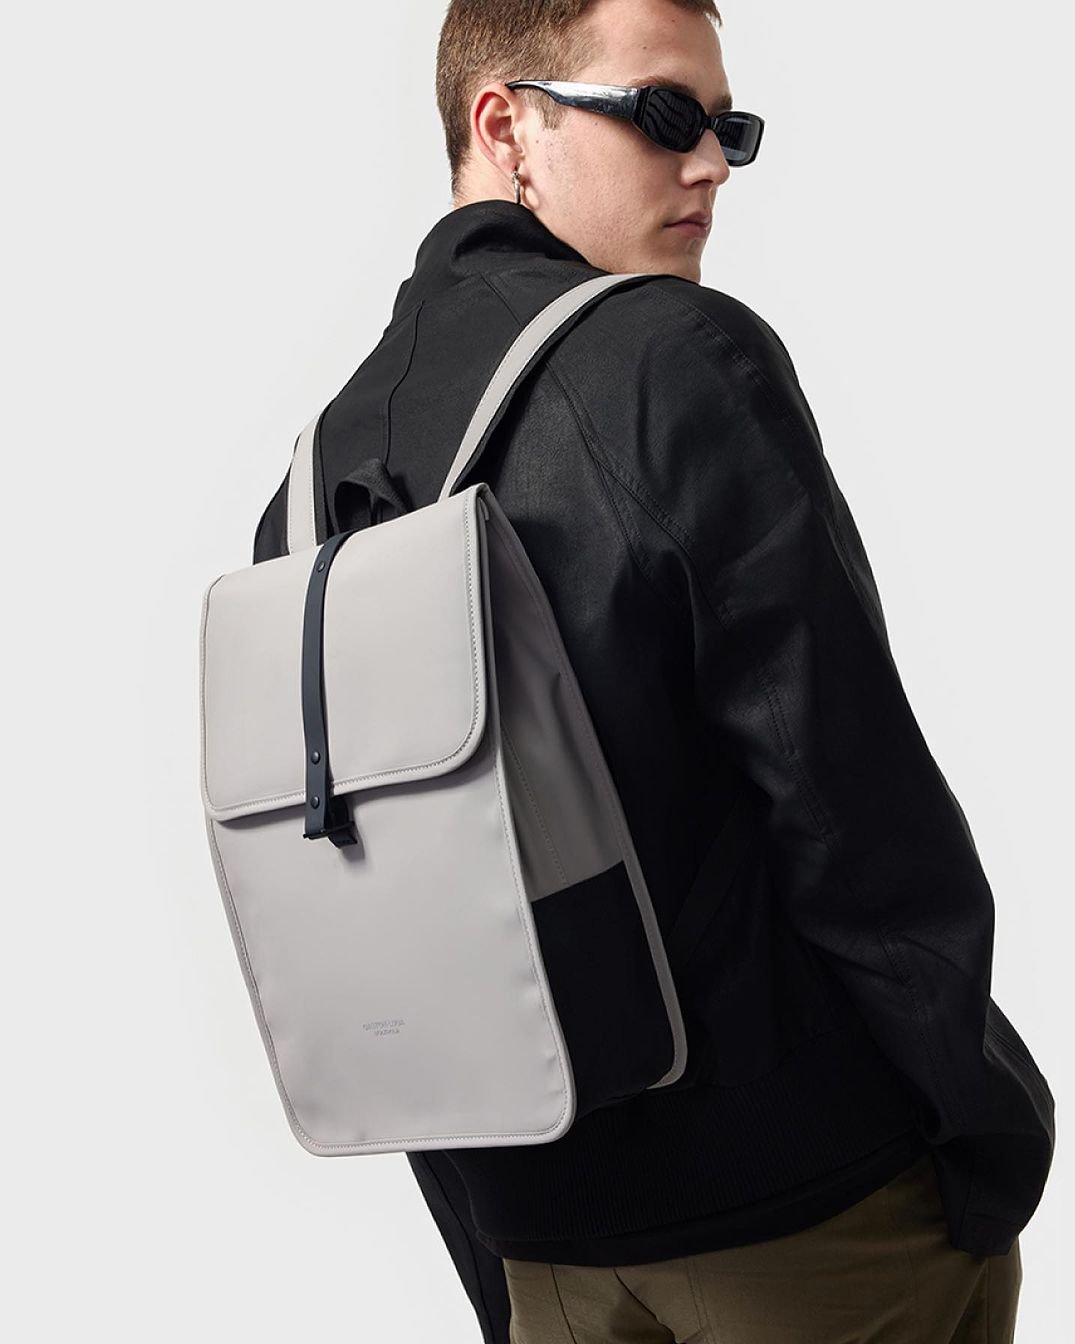 Däsh 13” and 16” Backpack are the compact yet functional backpack for your daily commute or weekend adventures.It has a spacious main compartment, a dedicated laptop divider, and a zipped pocket for easy access to your smaller items.Available in all our online stores at gastonluga.com :)#gastonluga